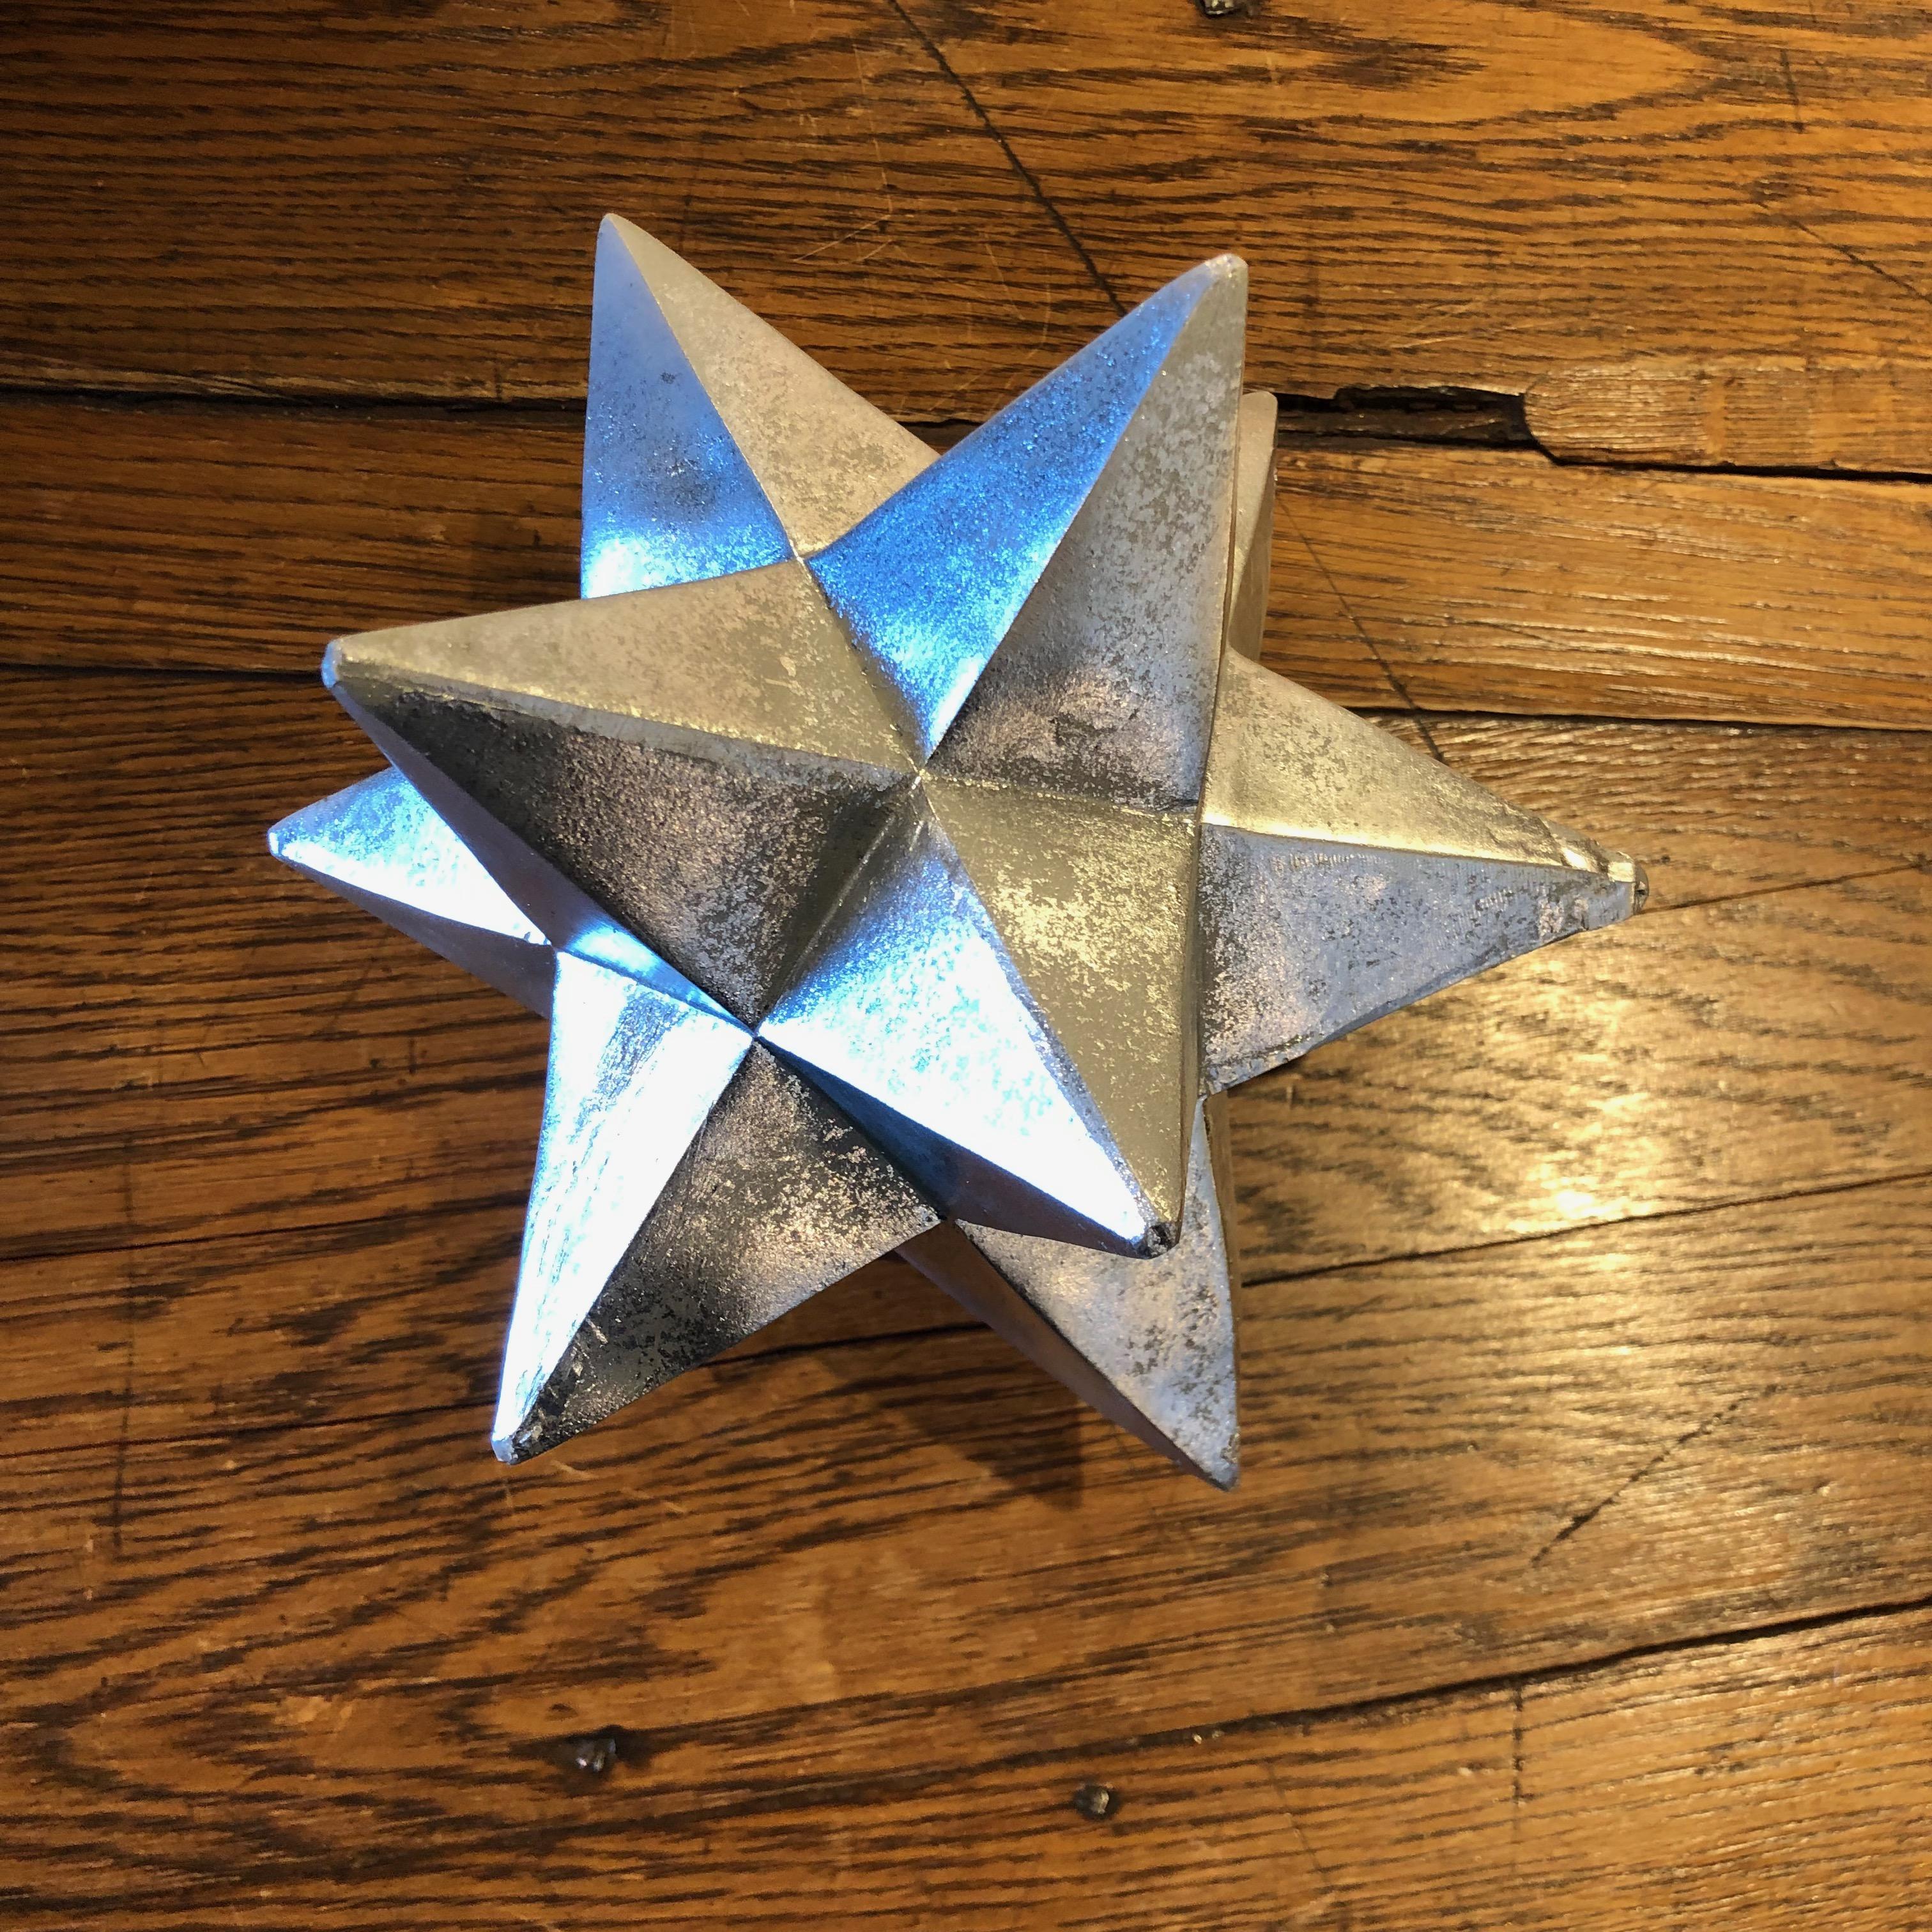 The perfect tabletop decor! This 12-point silver painted resin star will look amazing on any table.
Measures: 7” x 7” x 7”